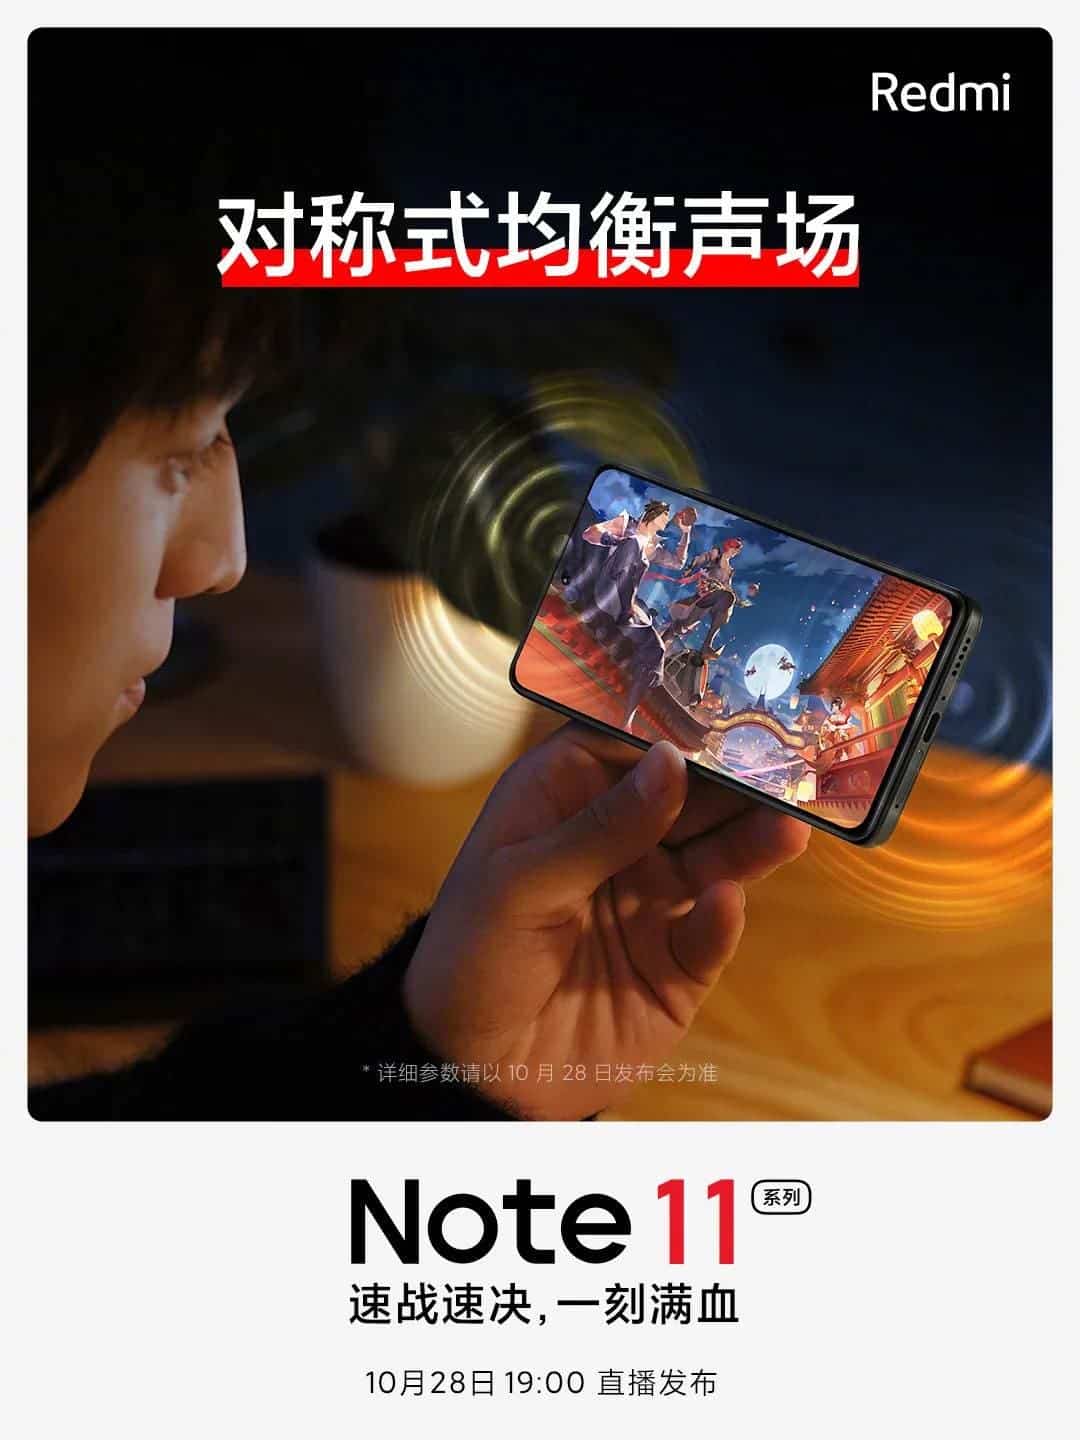 Redmi Note 11 Pro promotional poster_2